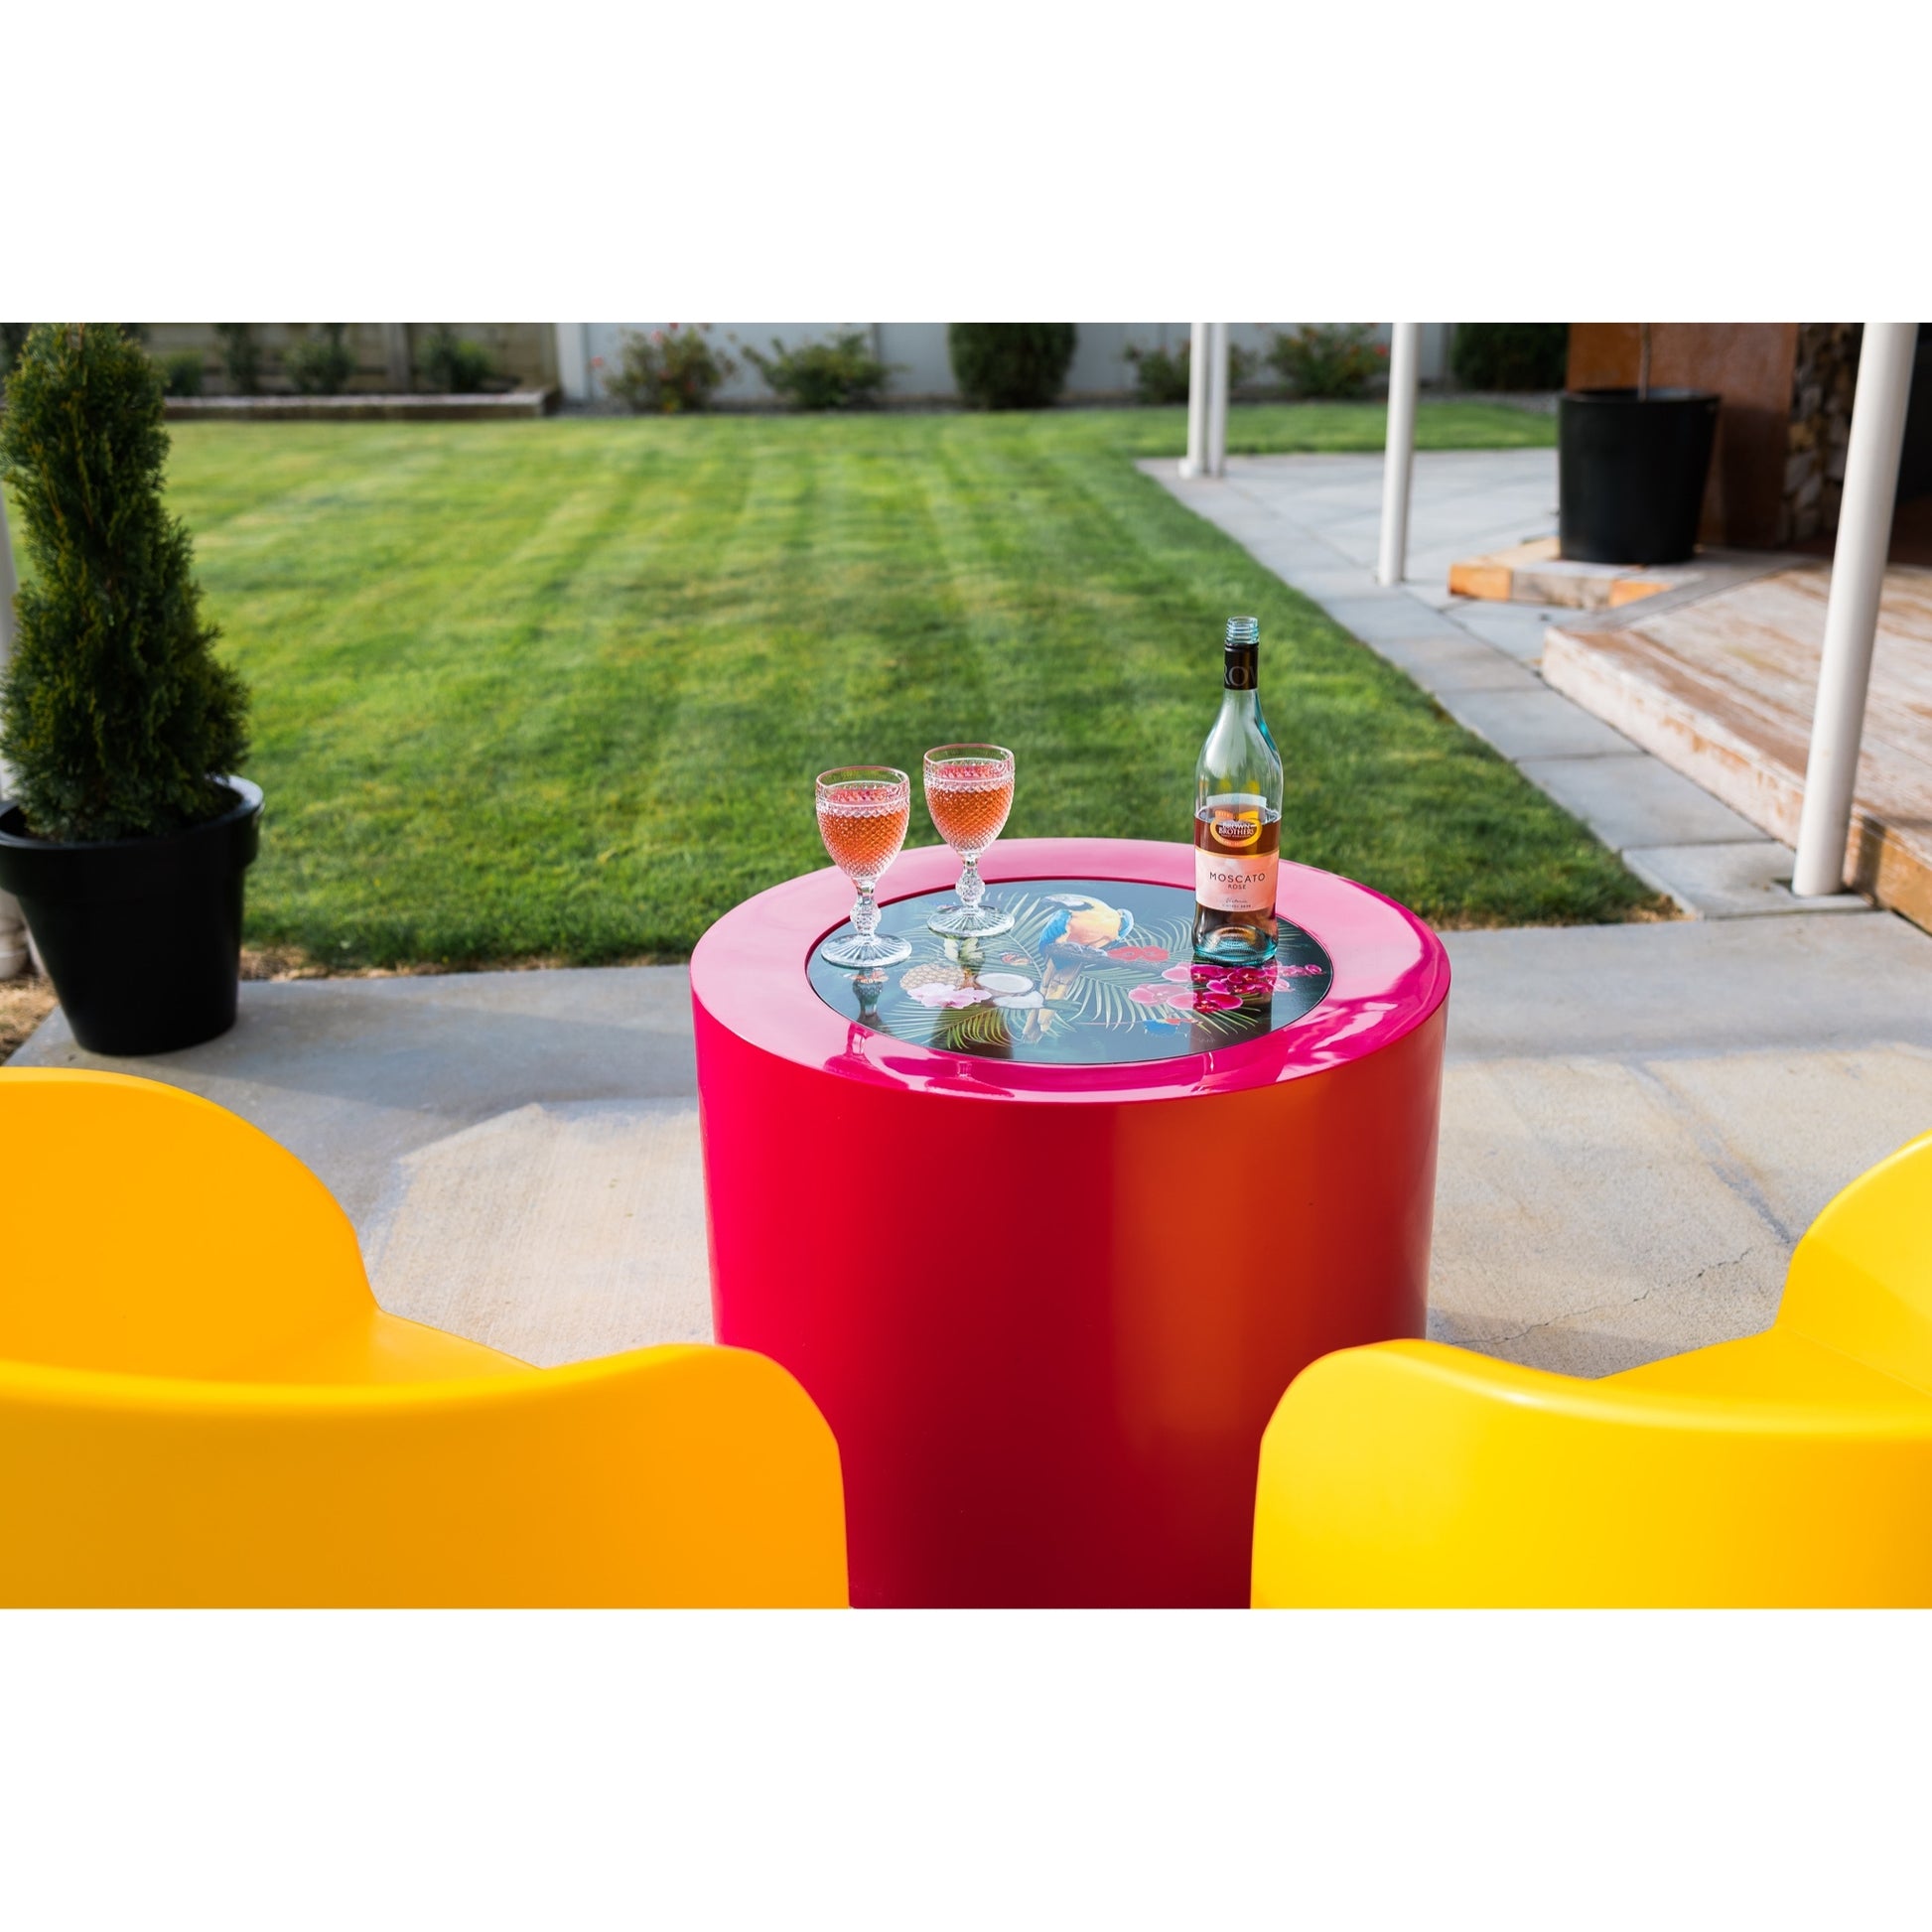 A pink cylinder shaped outdoor table made by Modscene NZ.